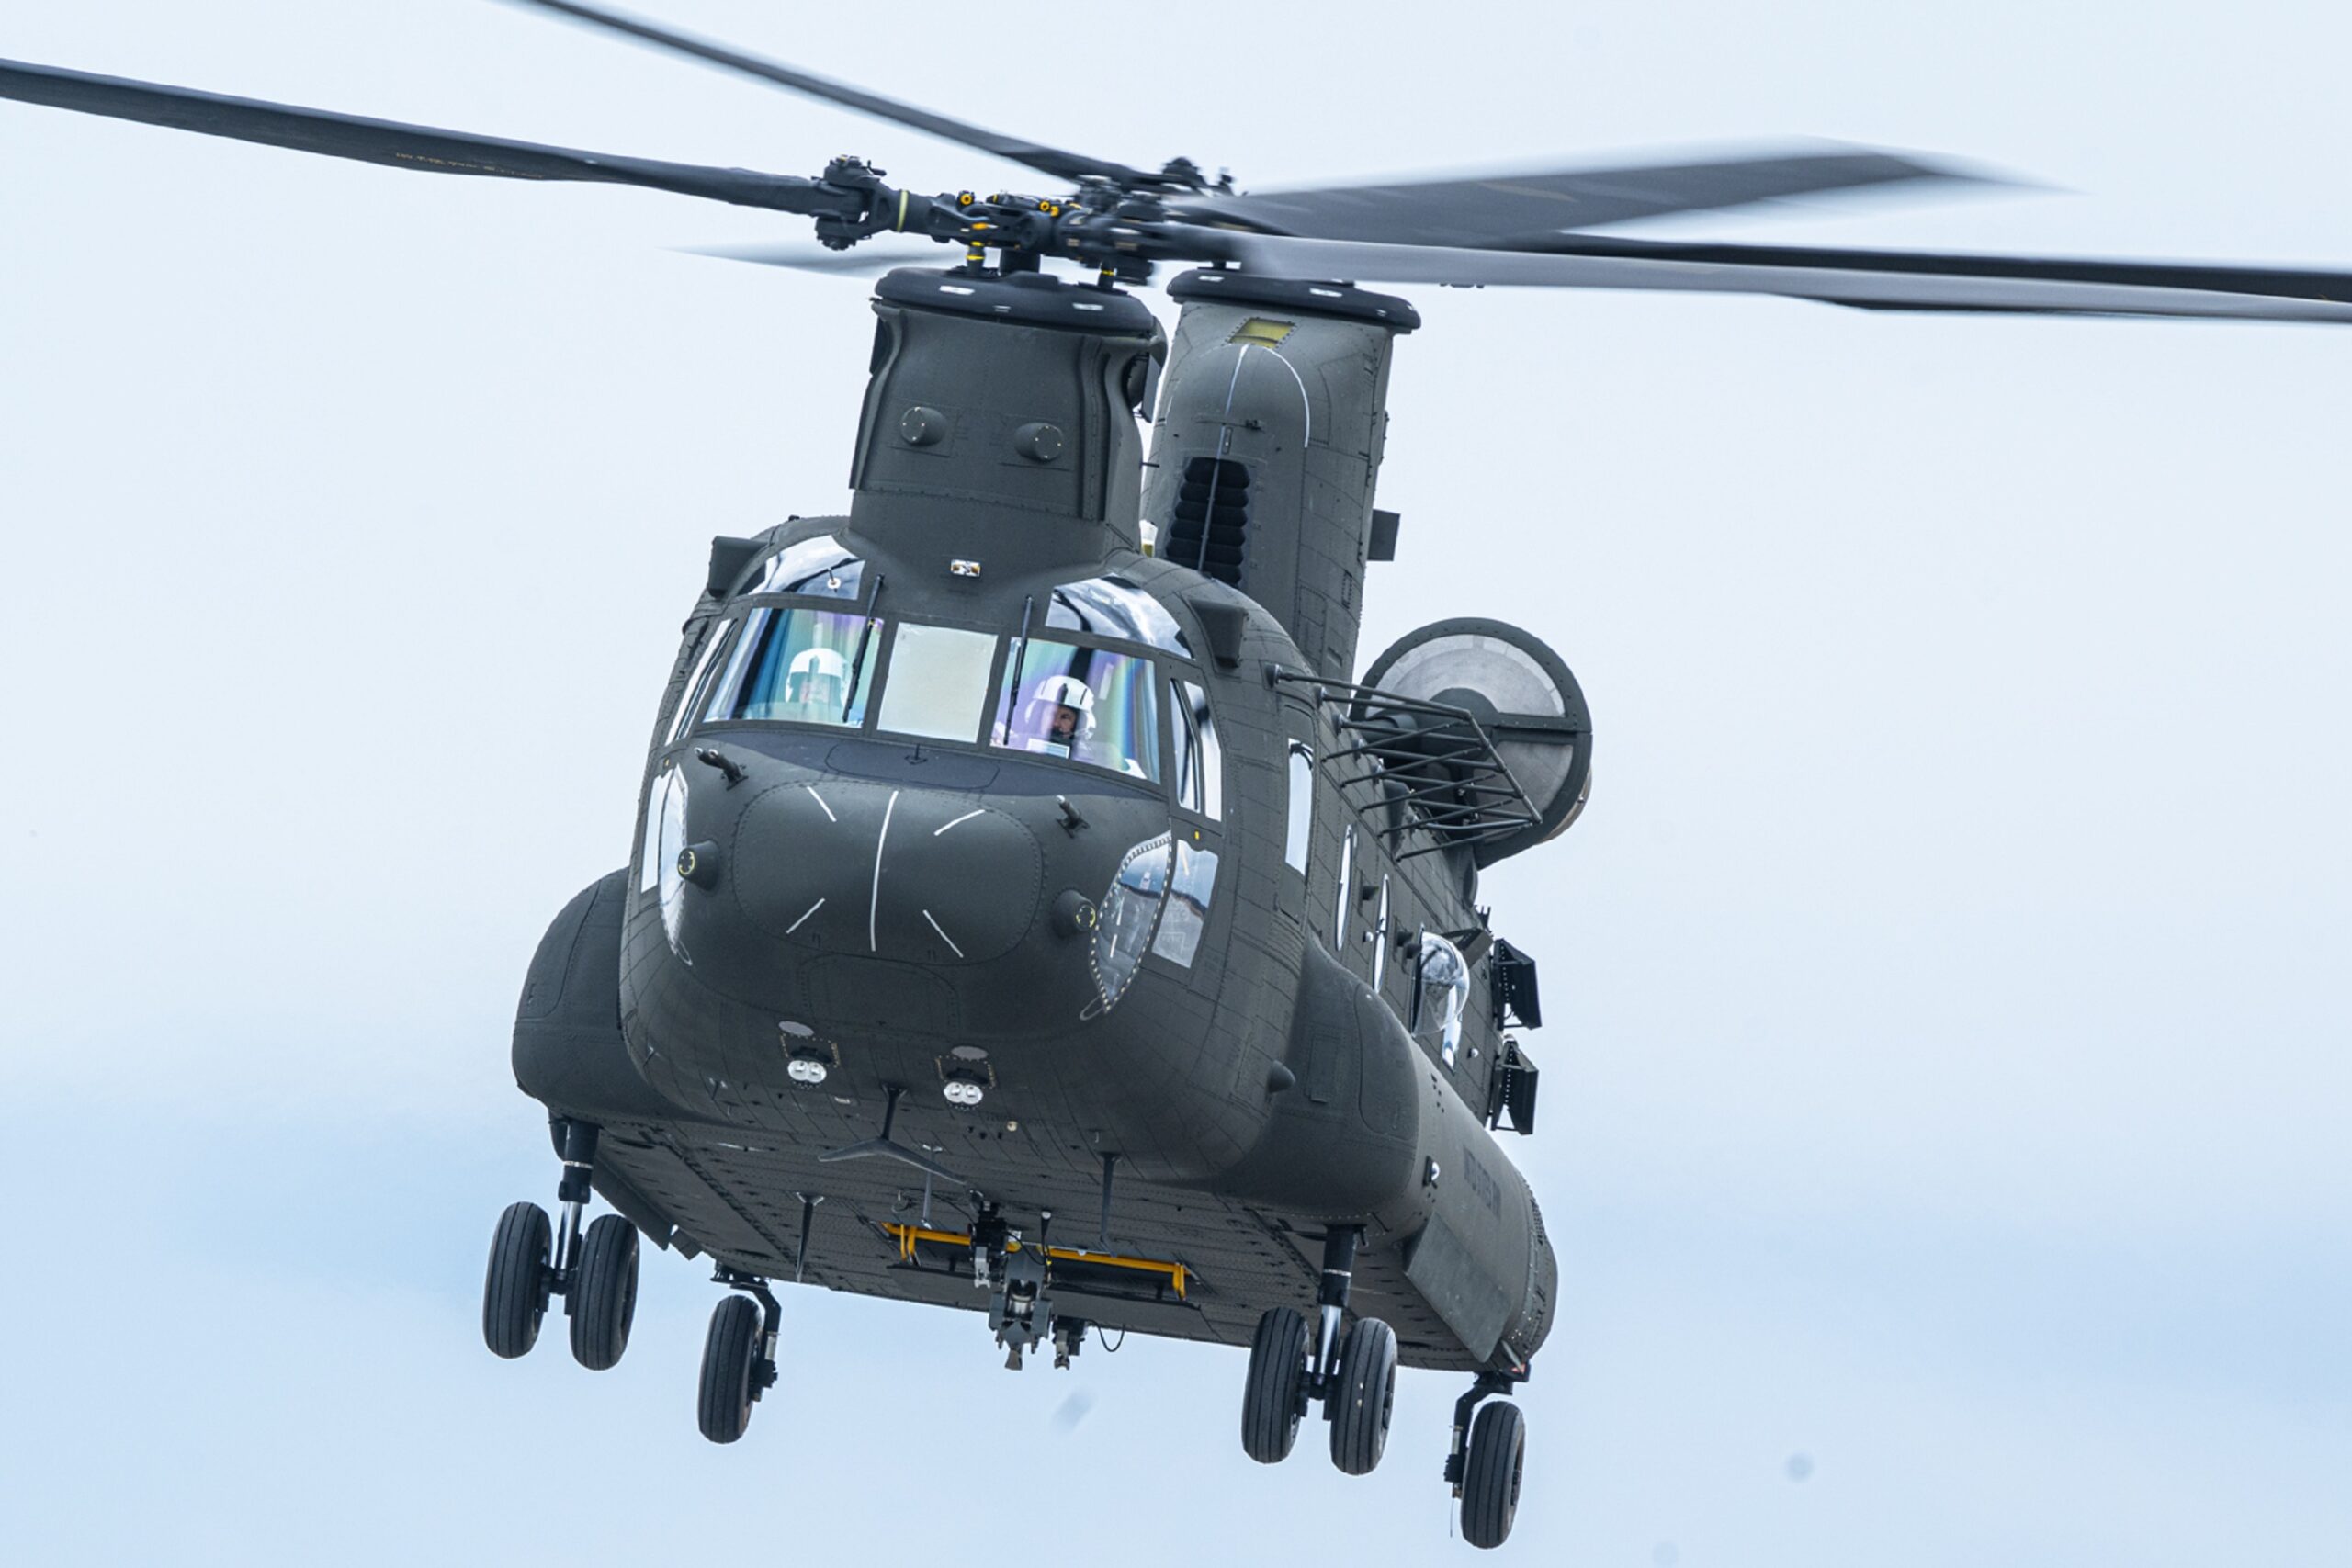 The first CH-47F Block II has been delivered to the U.S. Army